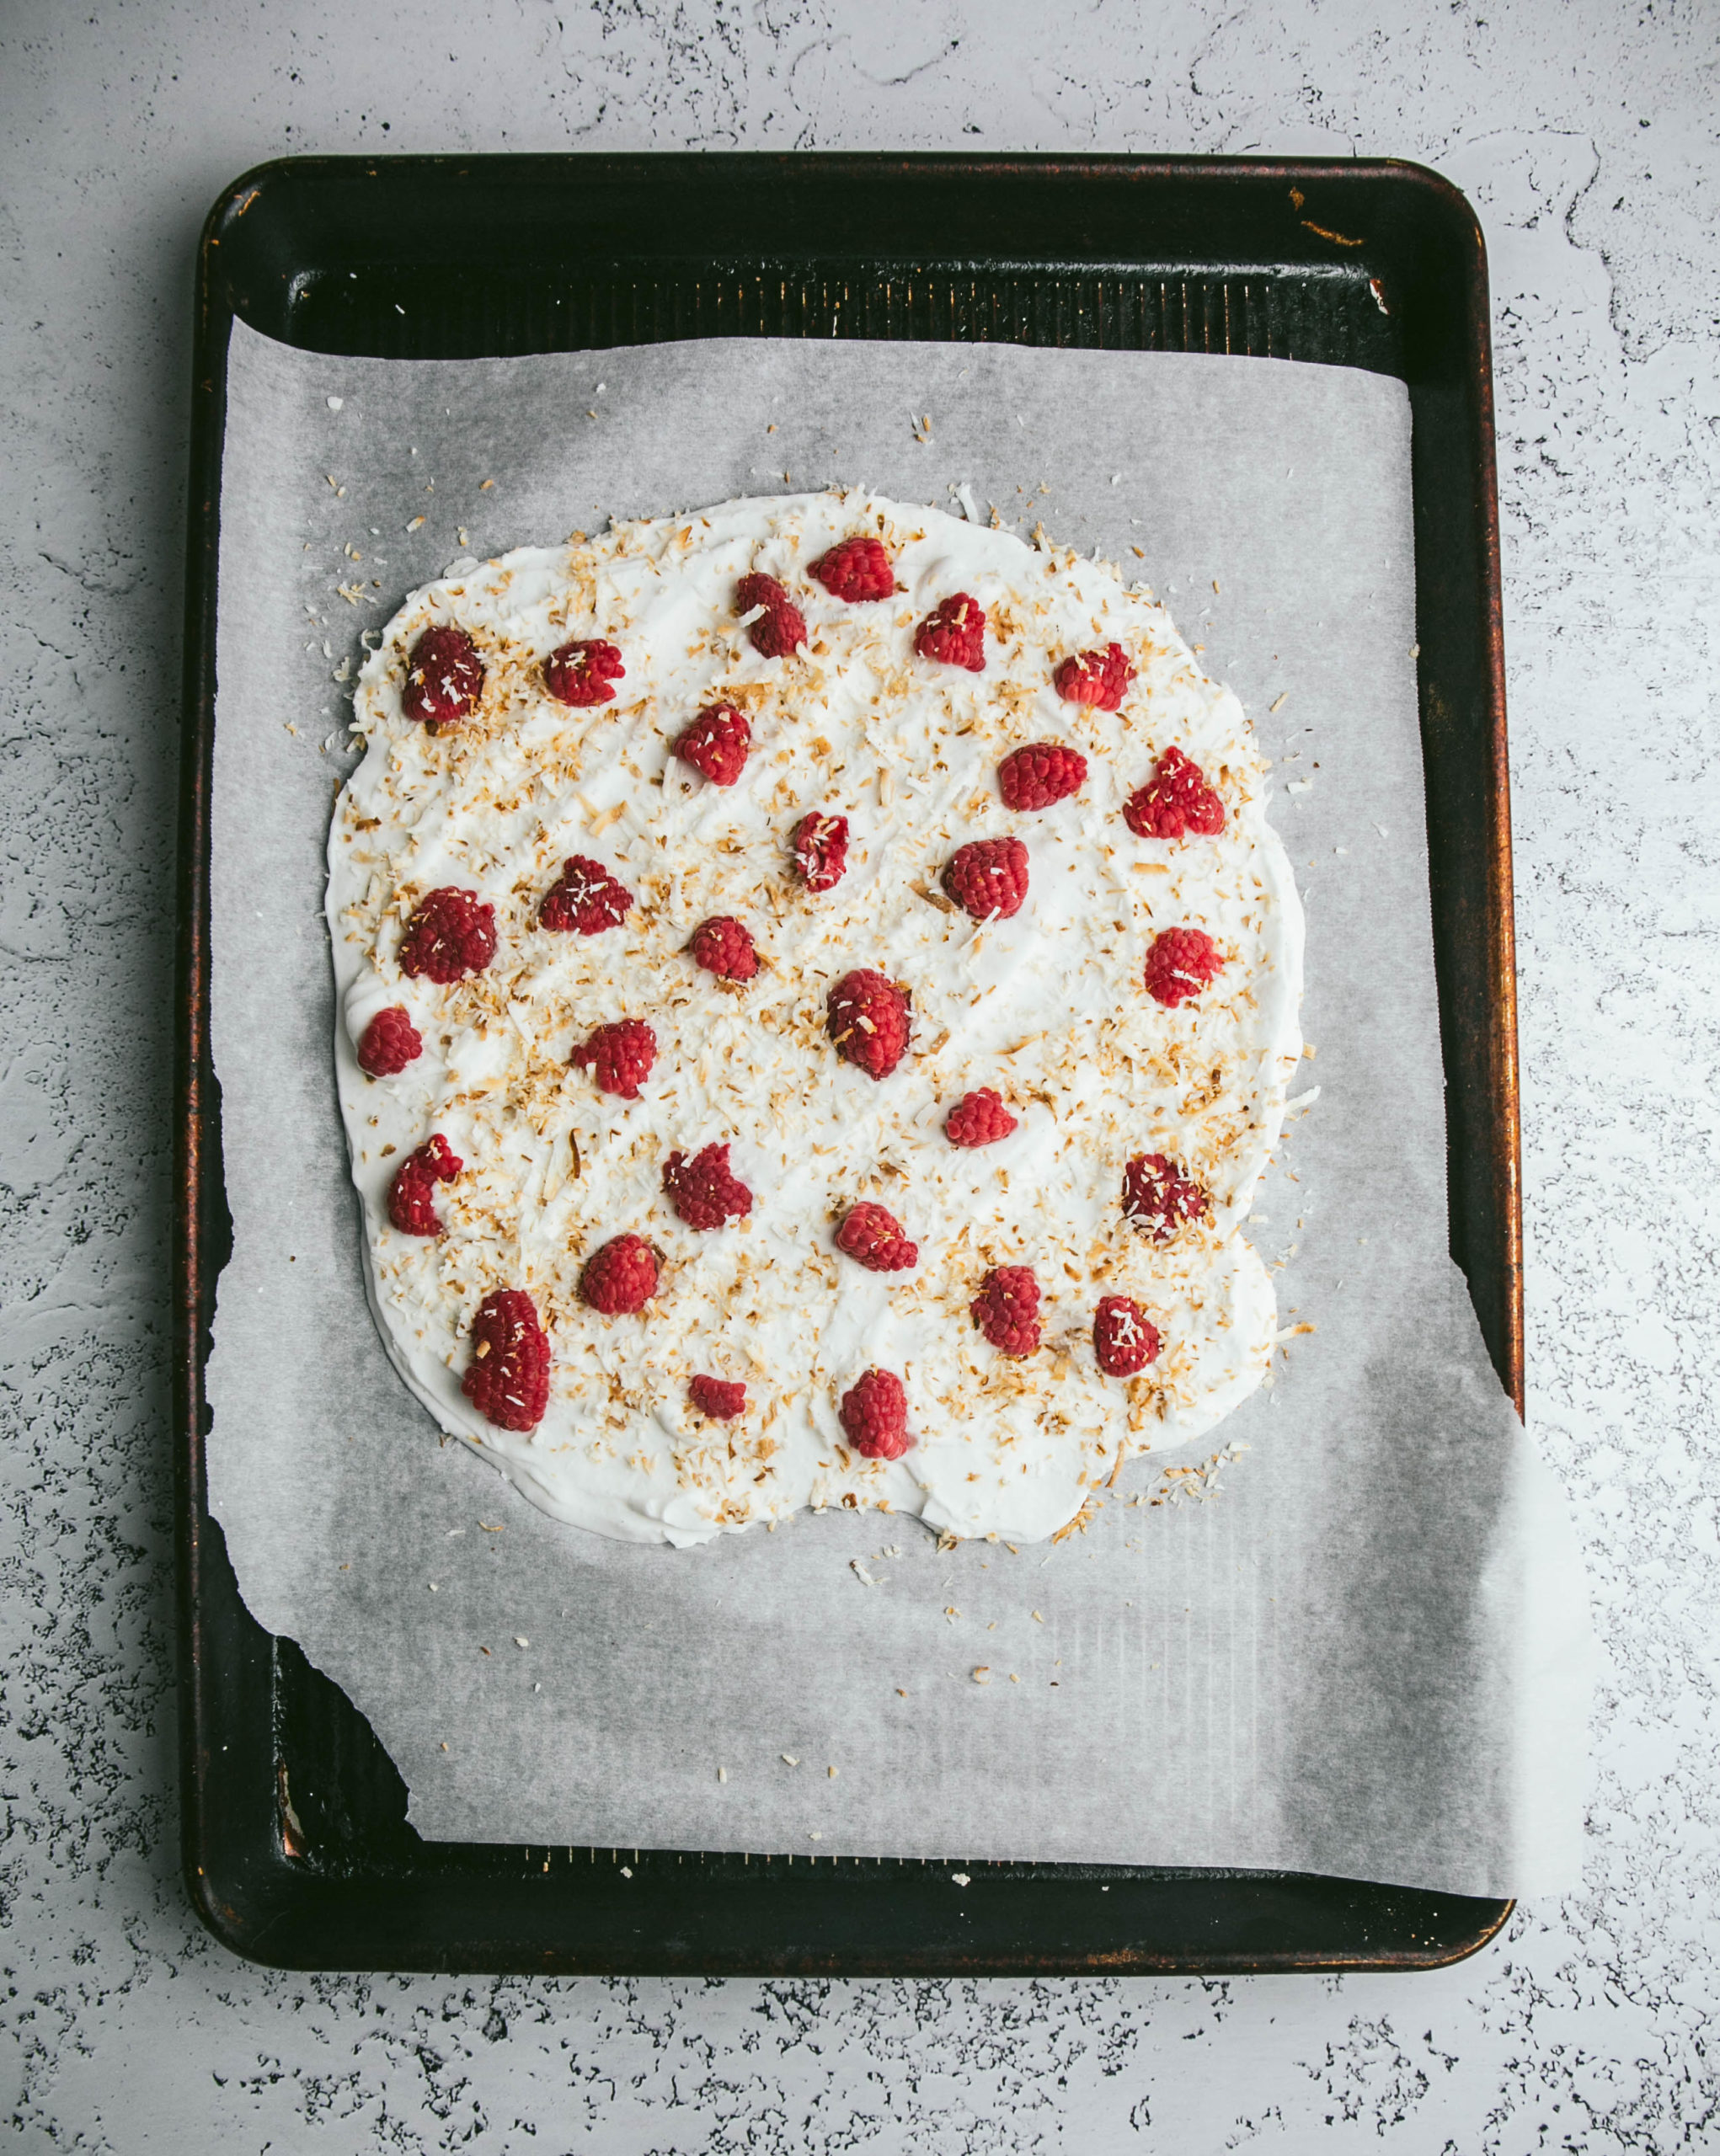 Yogurt spread out on baking tray with raspberries and toasted coconut